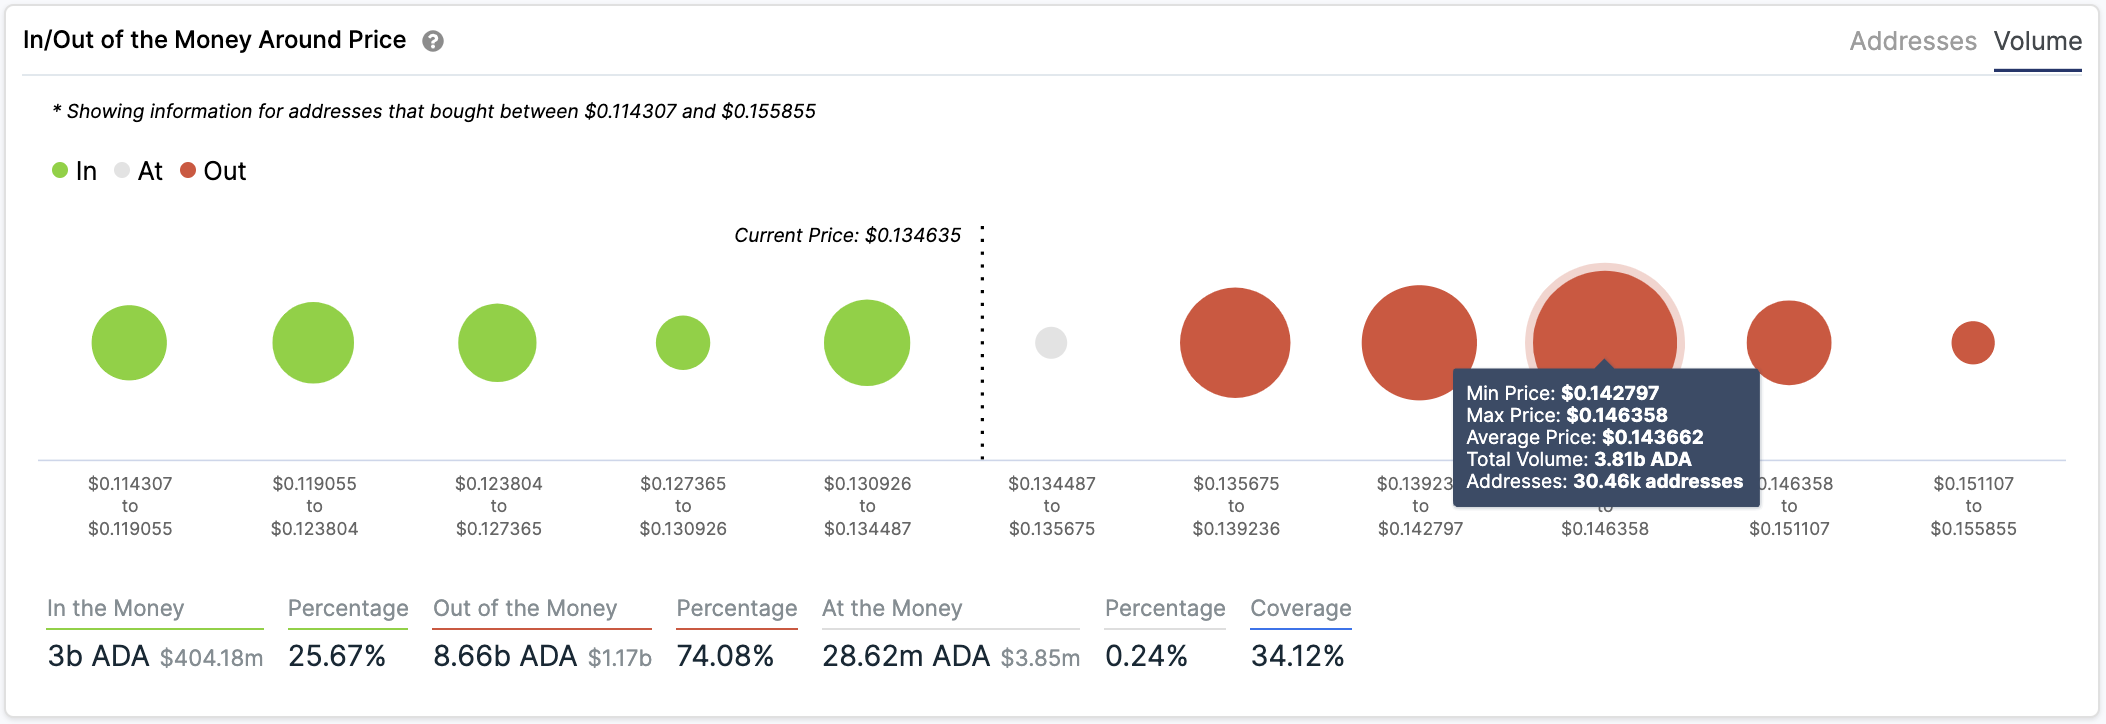 ADA's In/Out of the Money Around Price